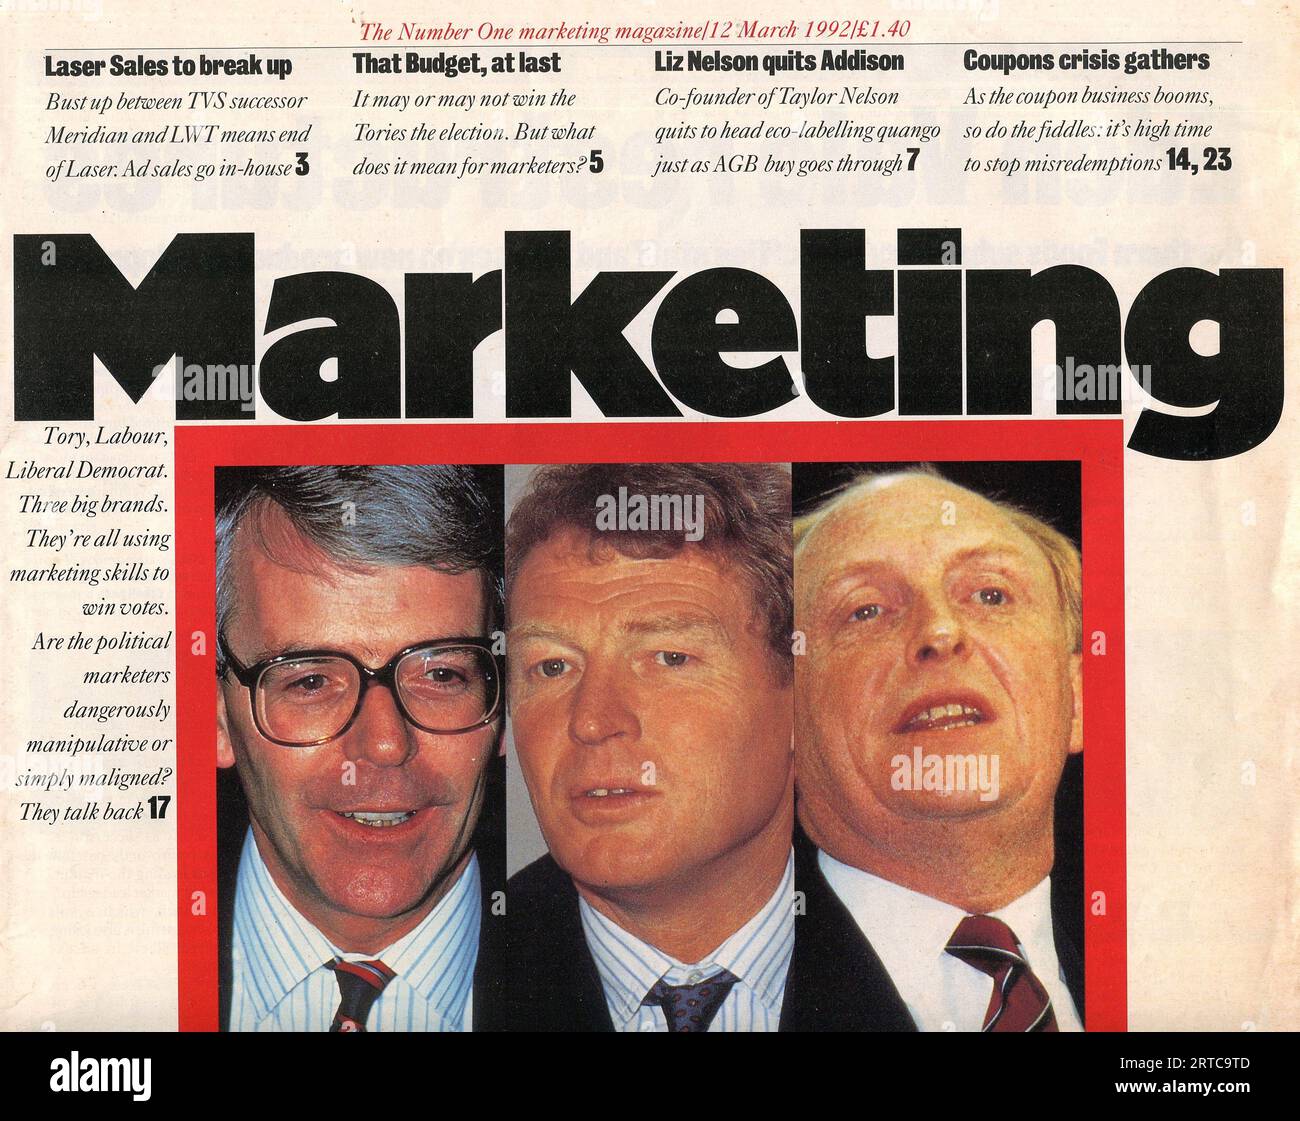 Archive copy of UK trade magazine Marketing published on March 12, 1992. Launched in 1931, the magazine ceased publication in 2016. Stock Photo